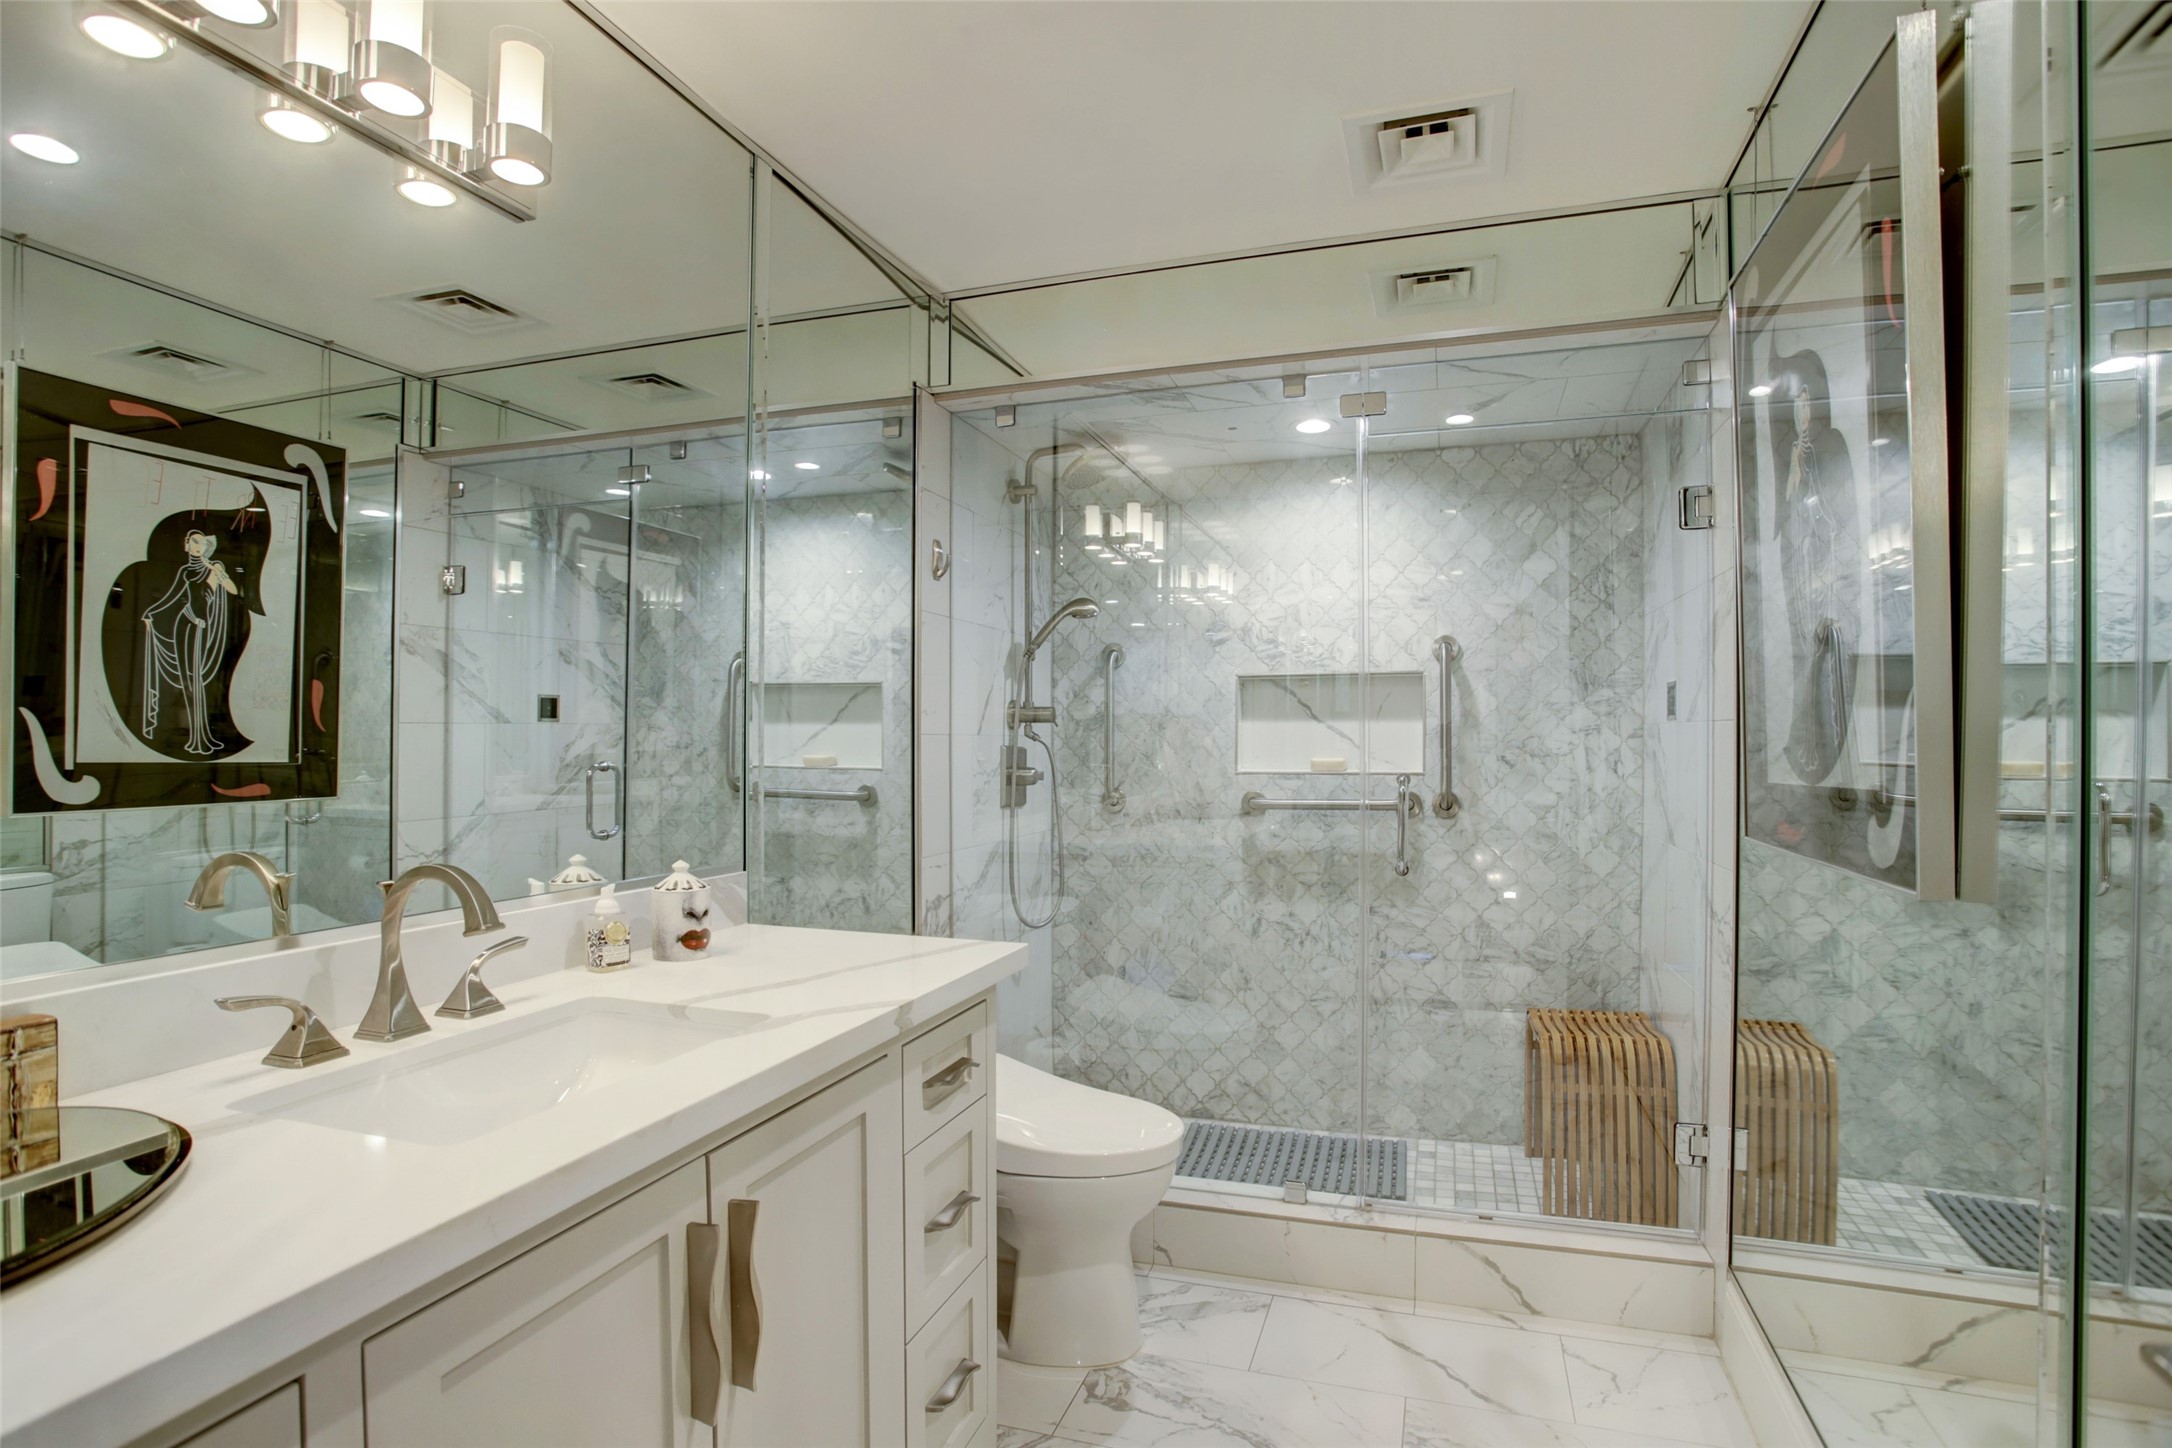 The hallway guest bathroom is another beauty, with an elegant marble tiled steam shower, Toto Washlet toilet, accent lighting and a full mirrored wall.